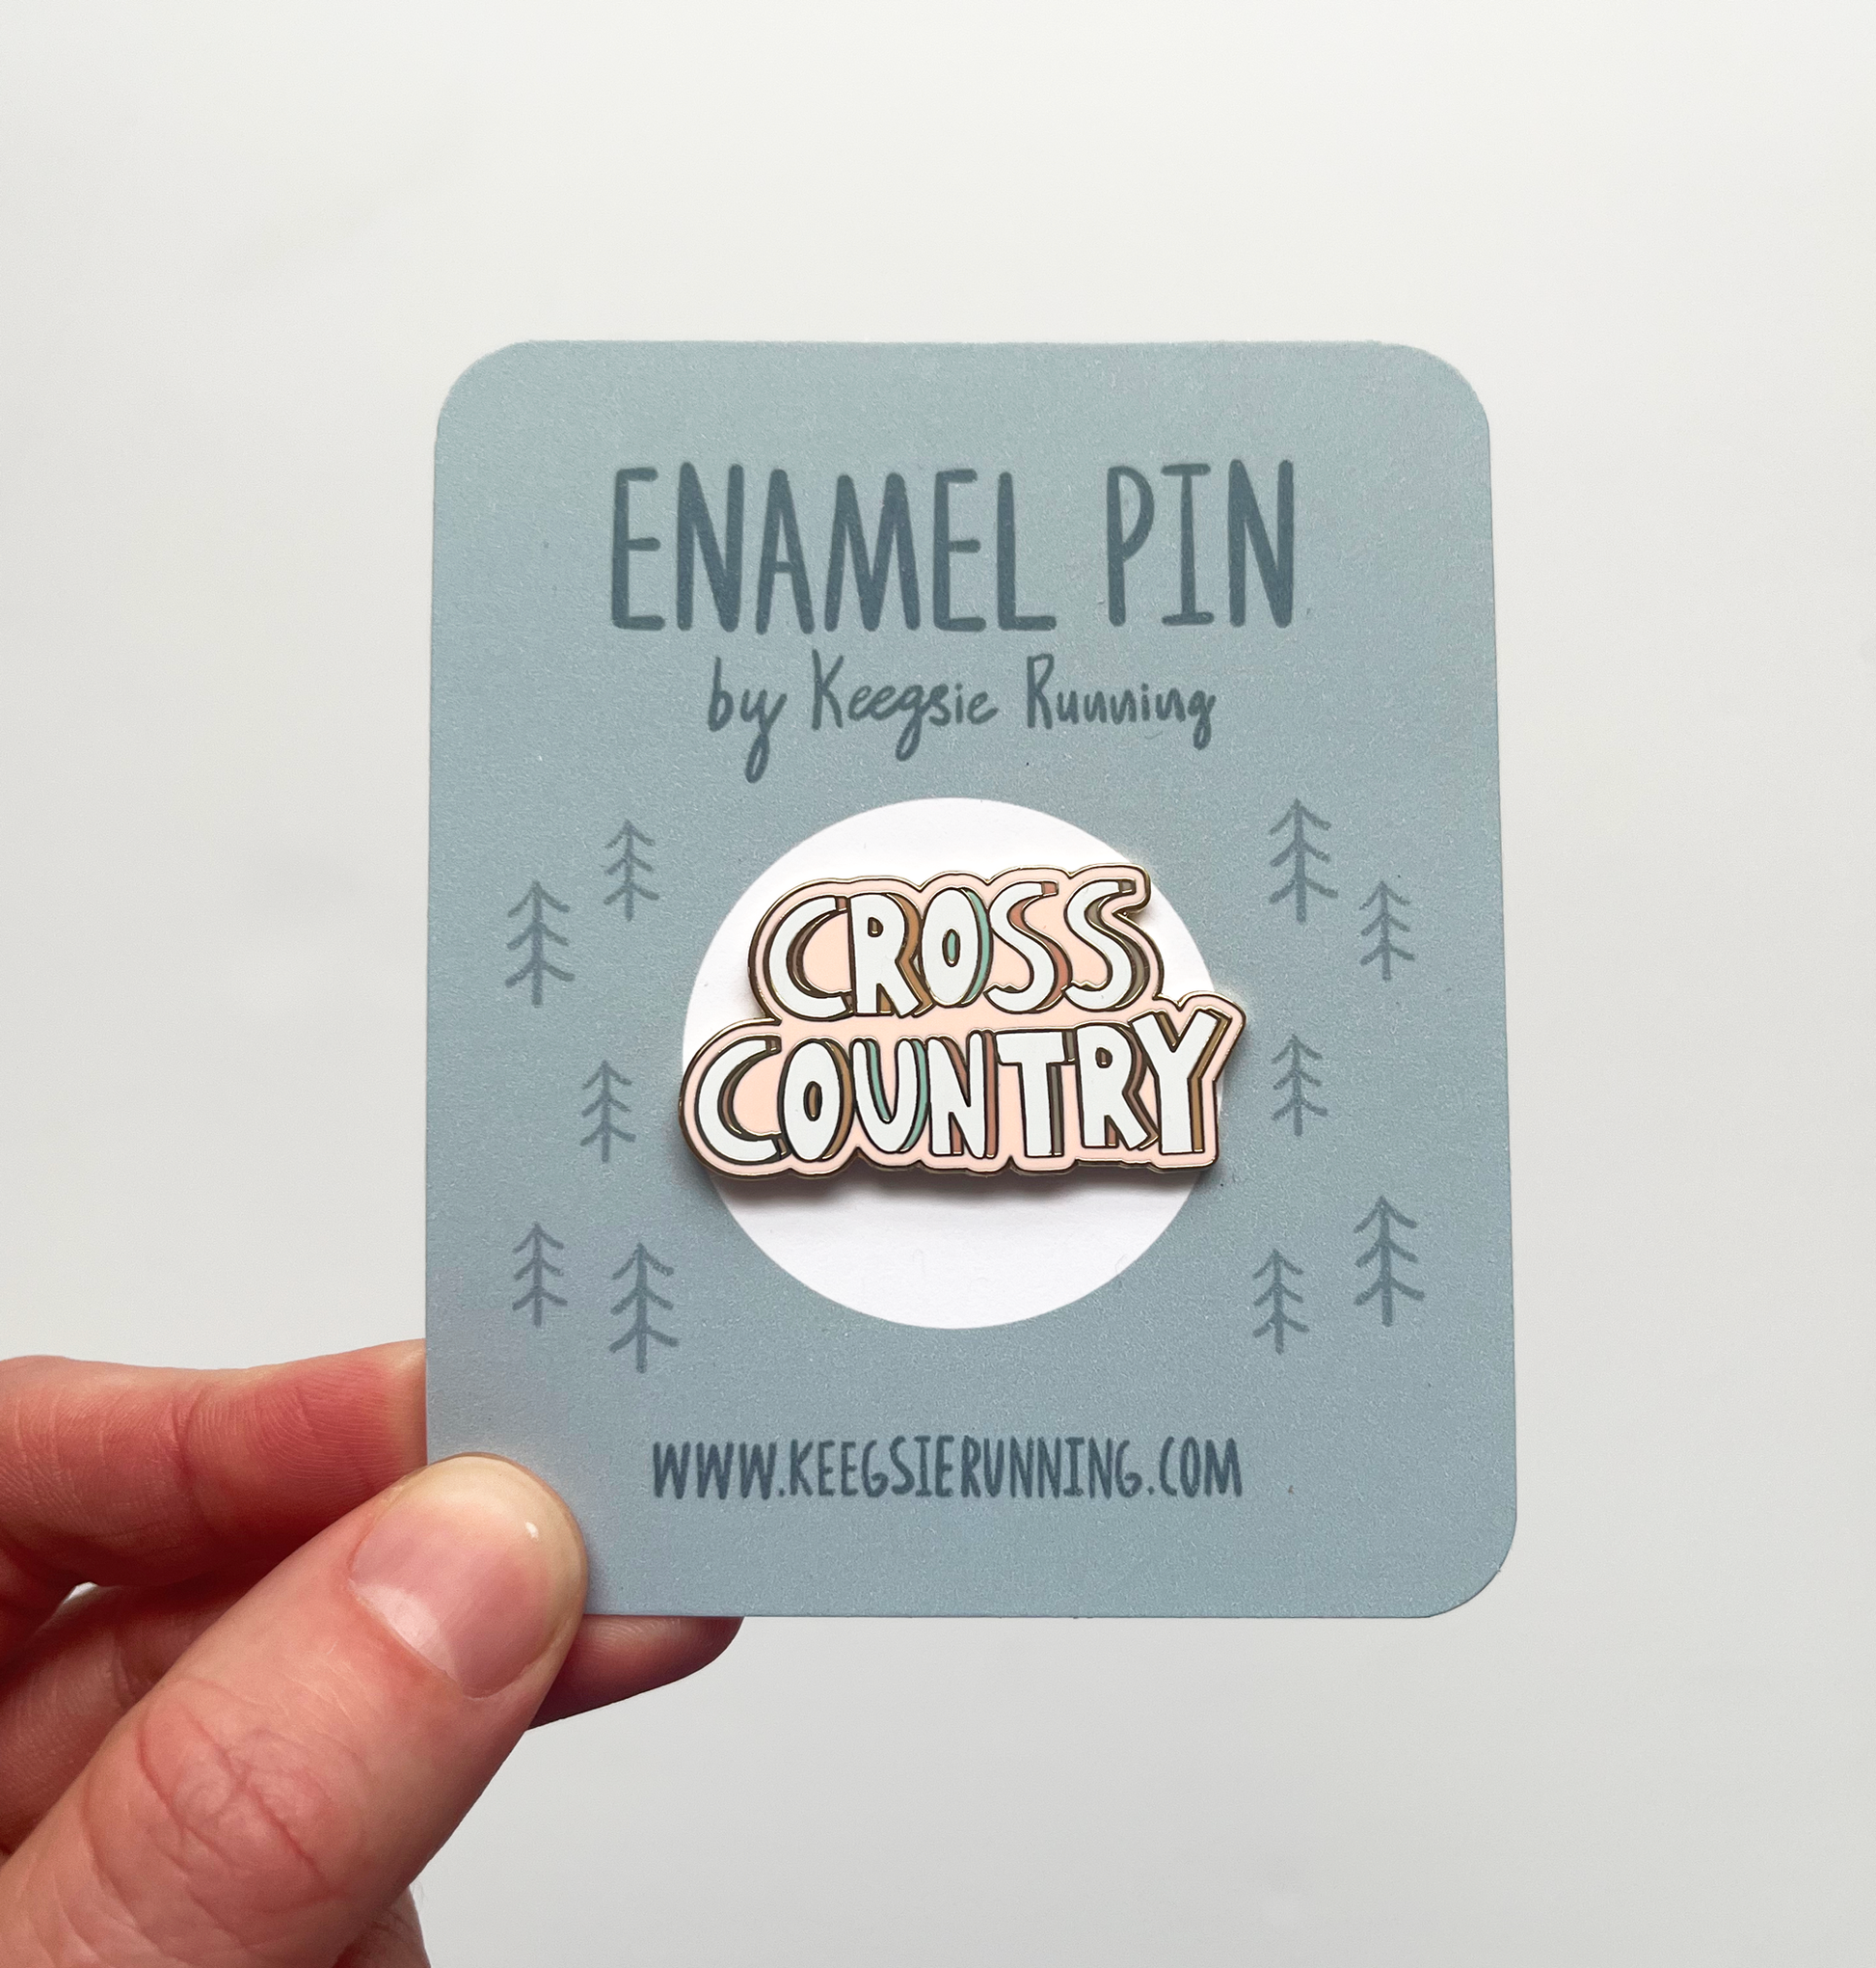 cross country enamel pin attached to backing card being held in hand